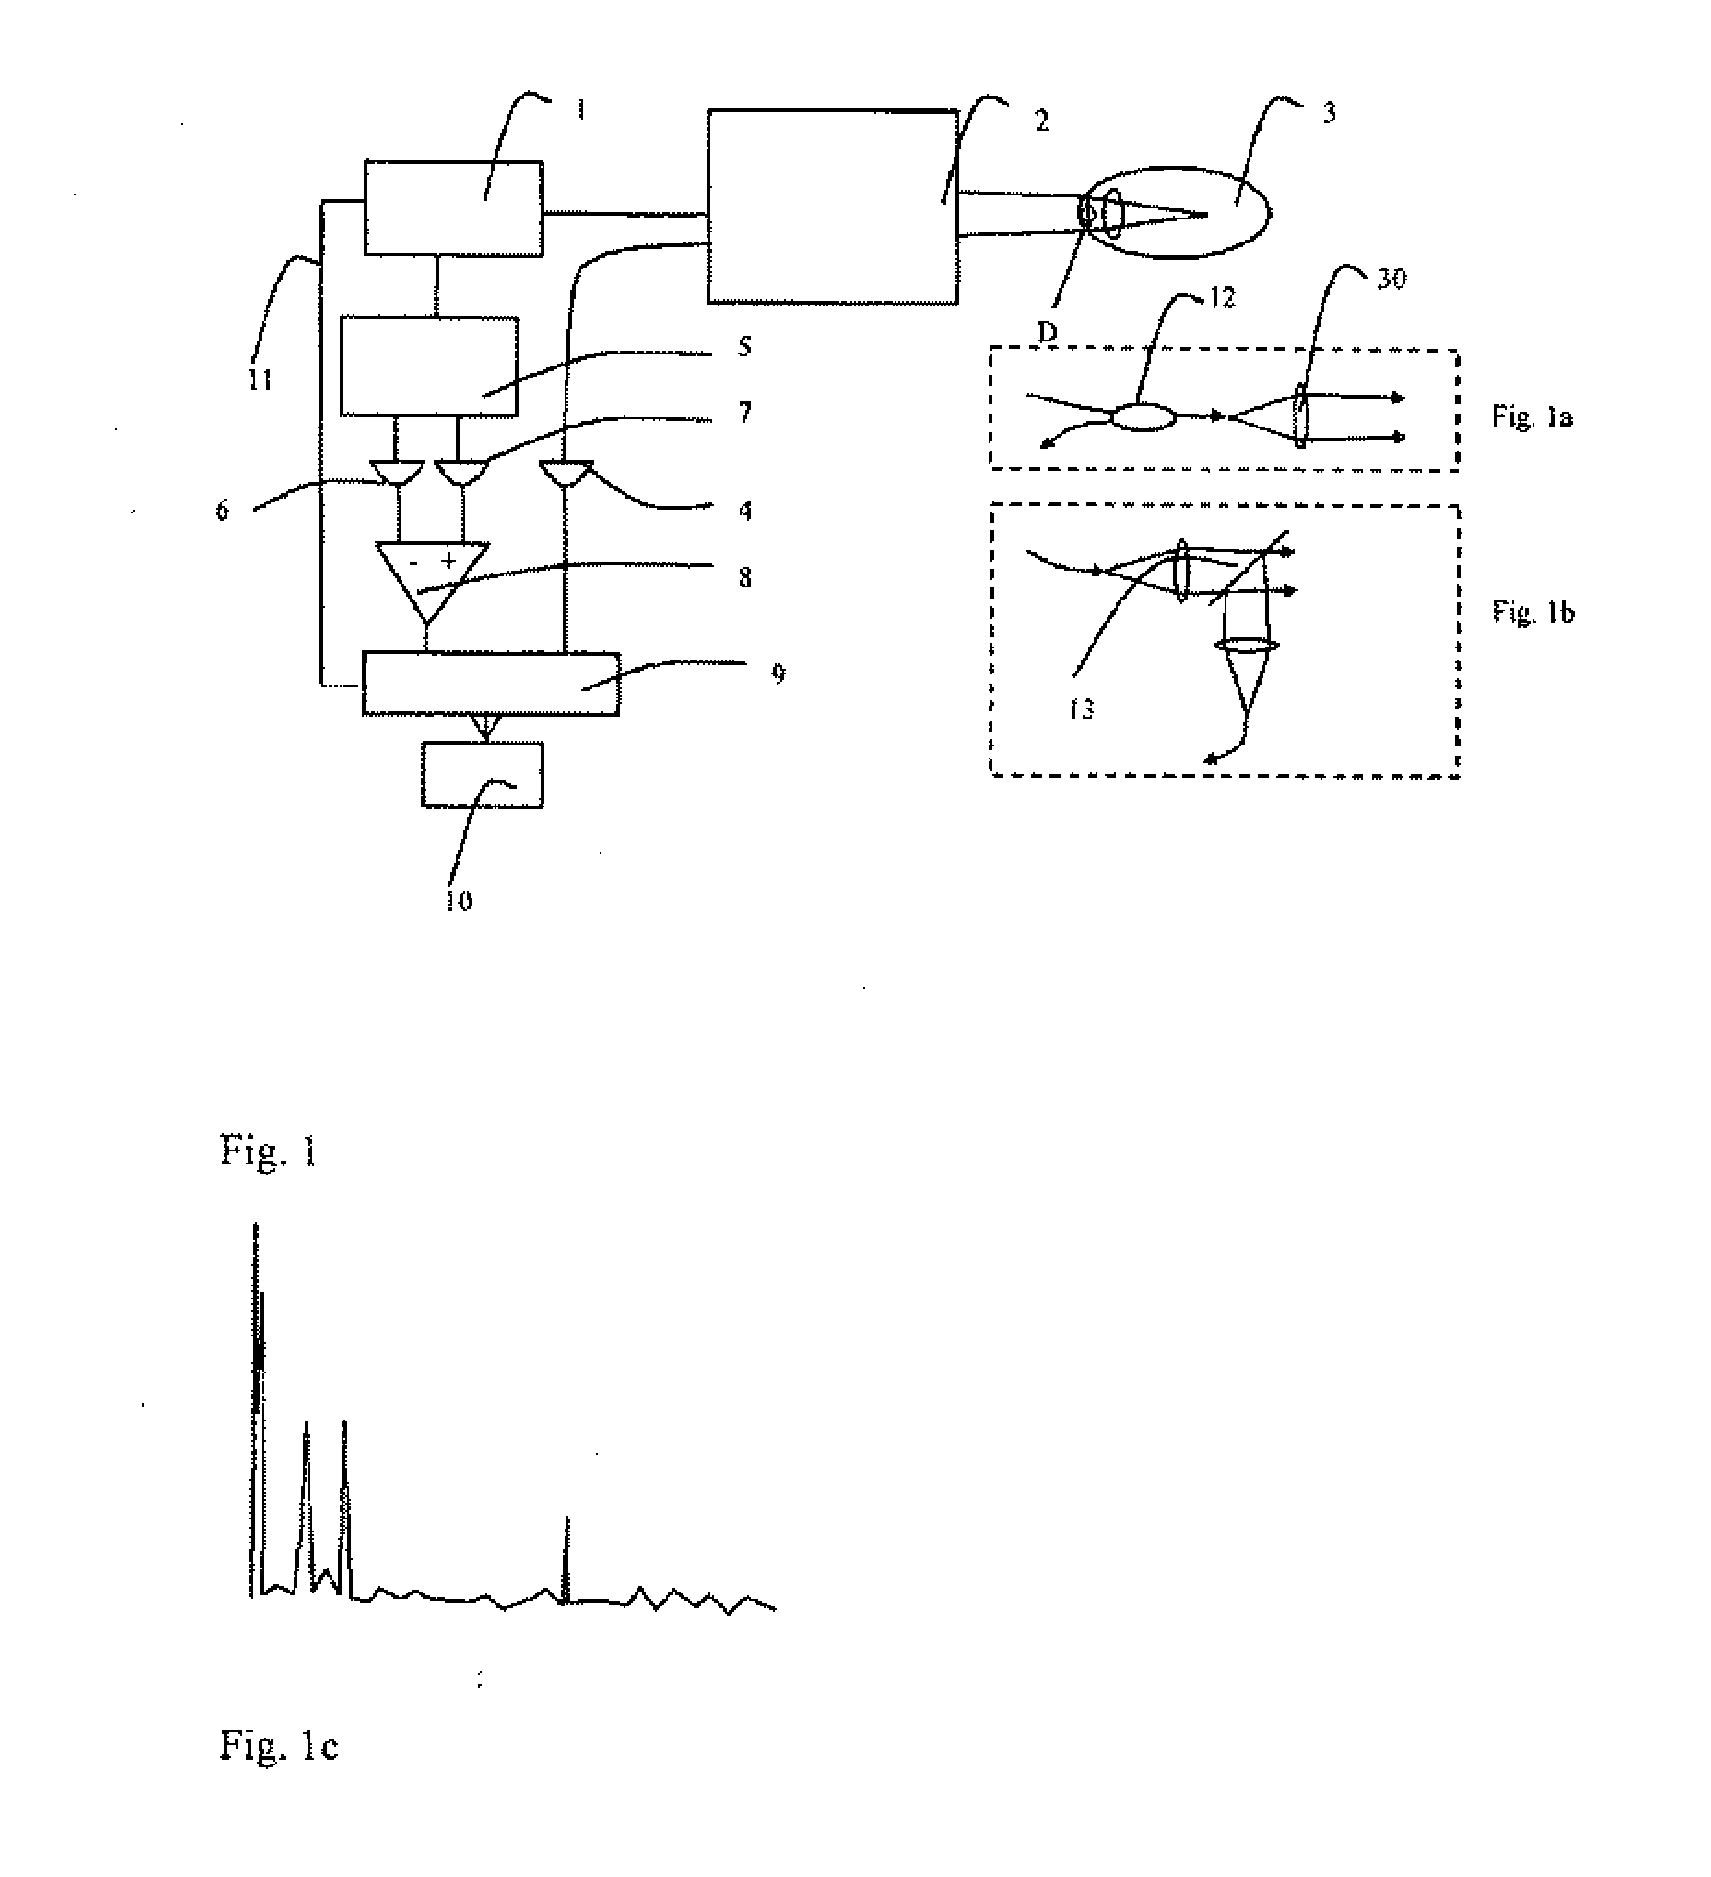 Device for swept-source optical coherence domain reflectometry